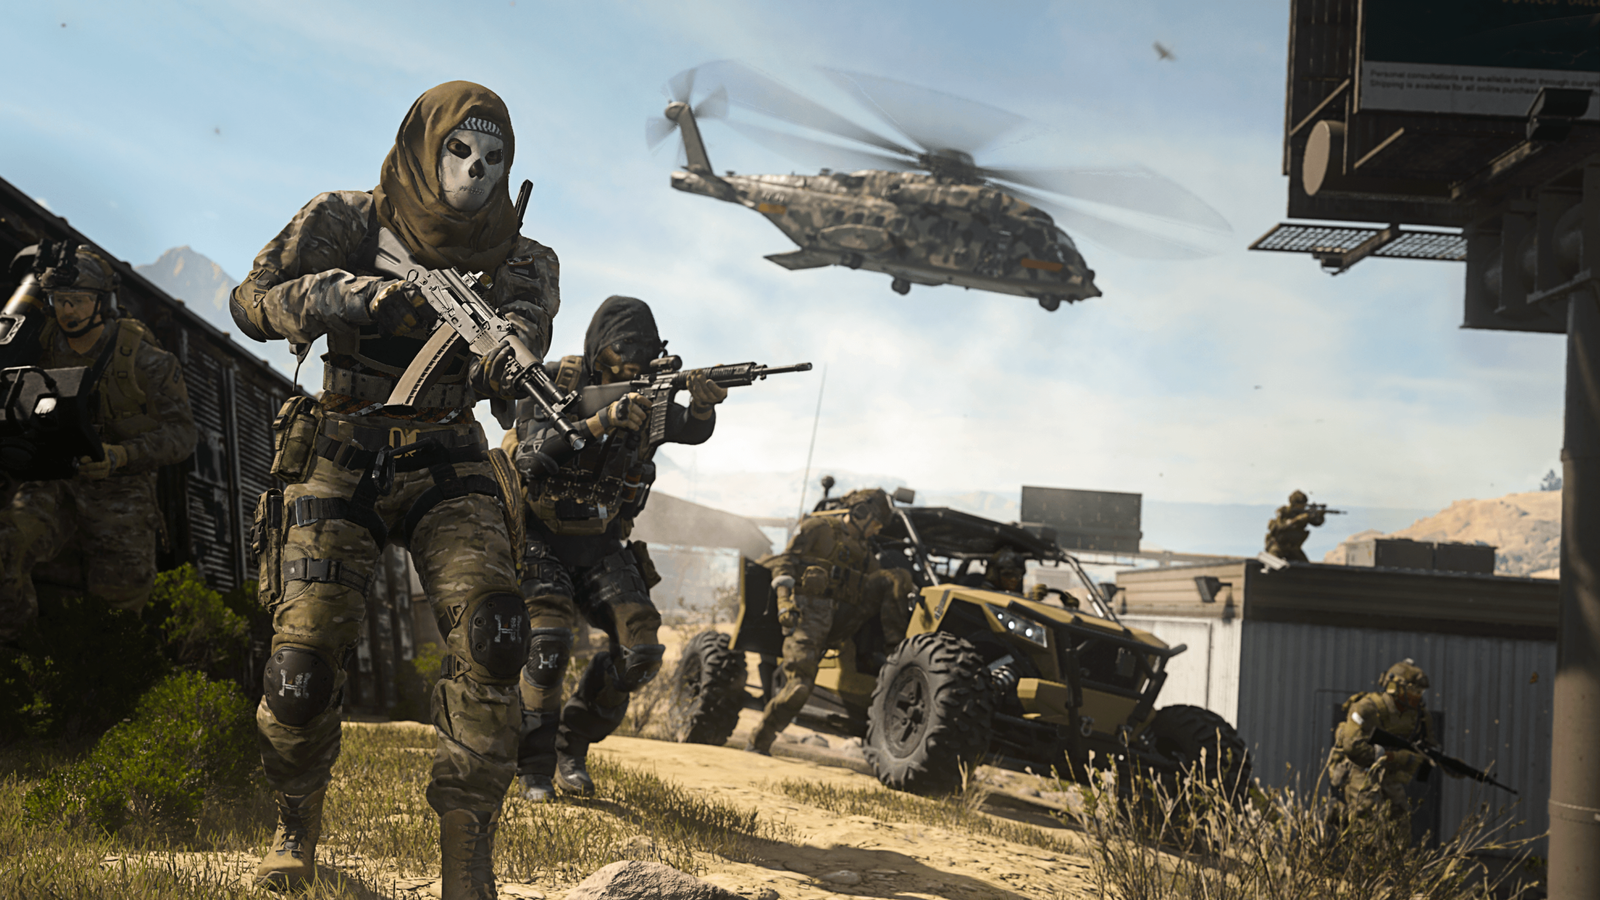 Microsoft enters ten year commitment bring Call of Duty to